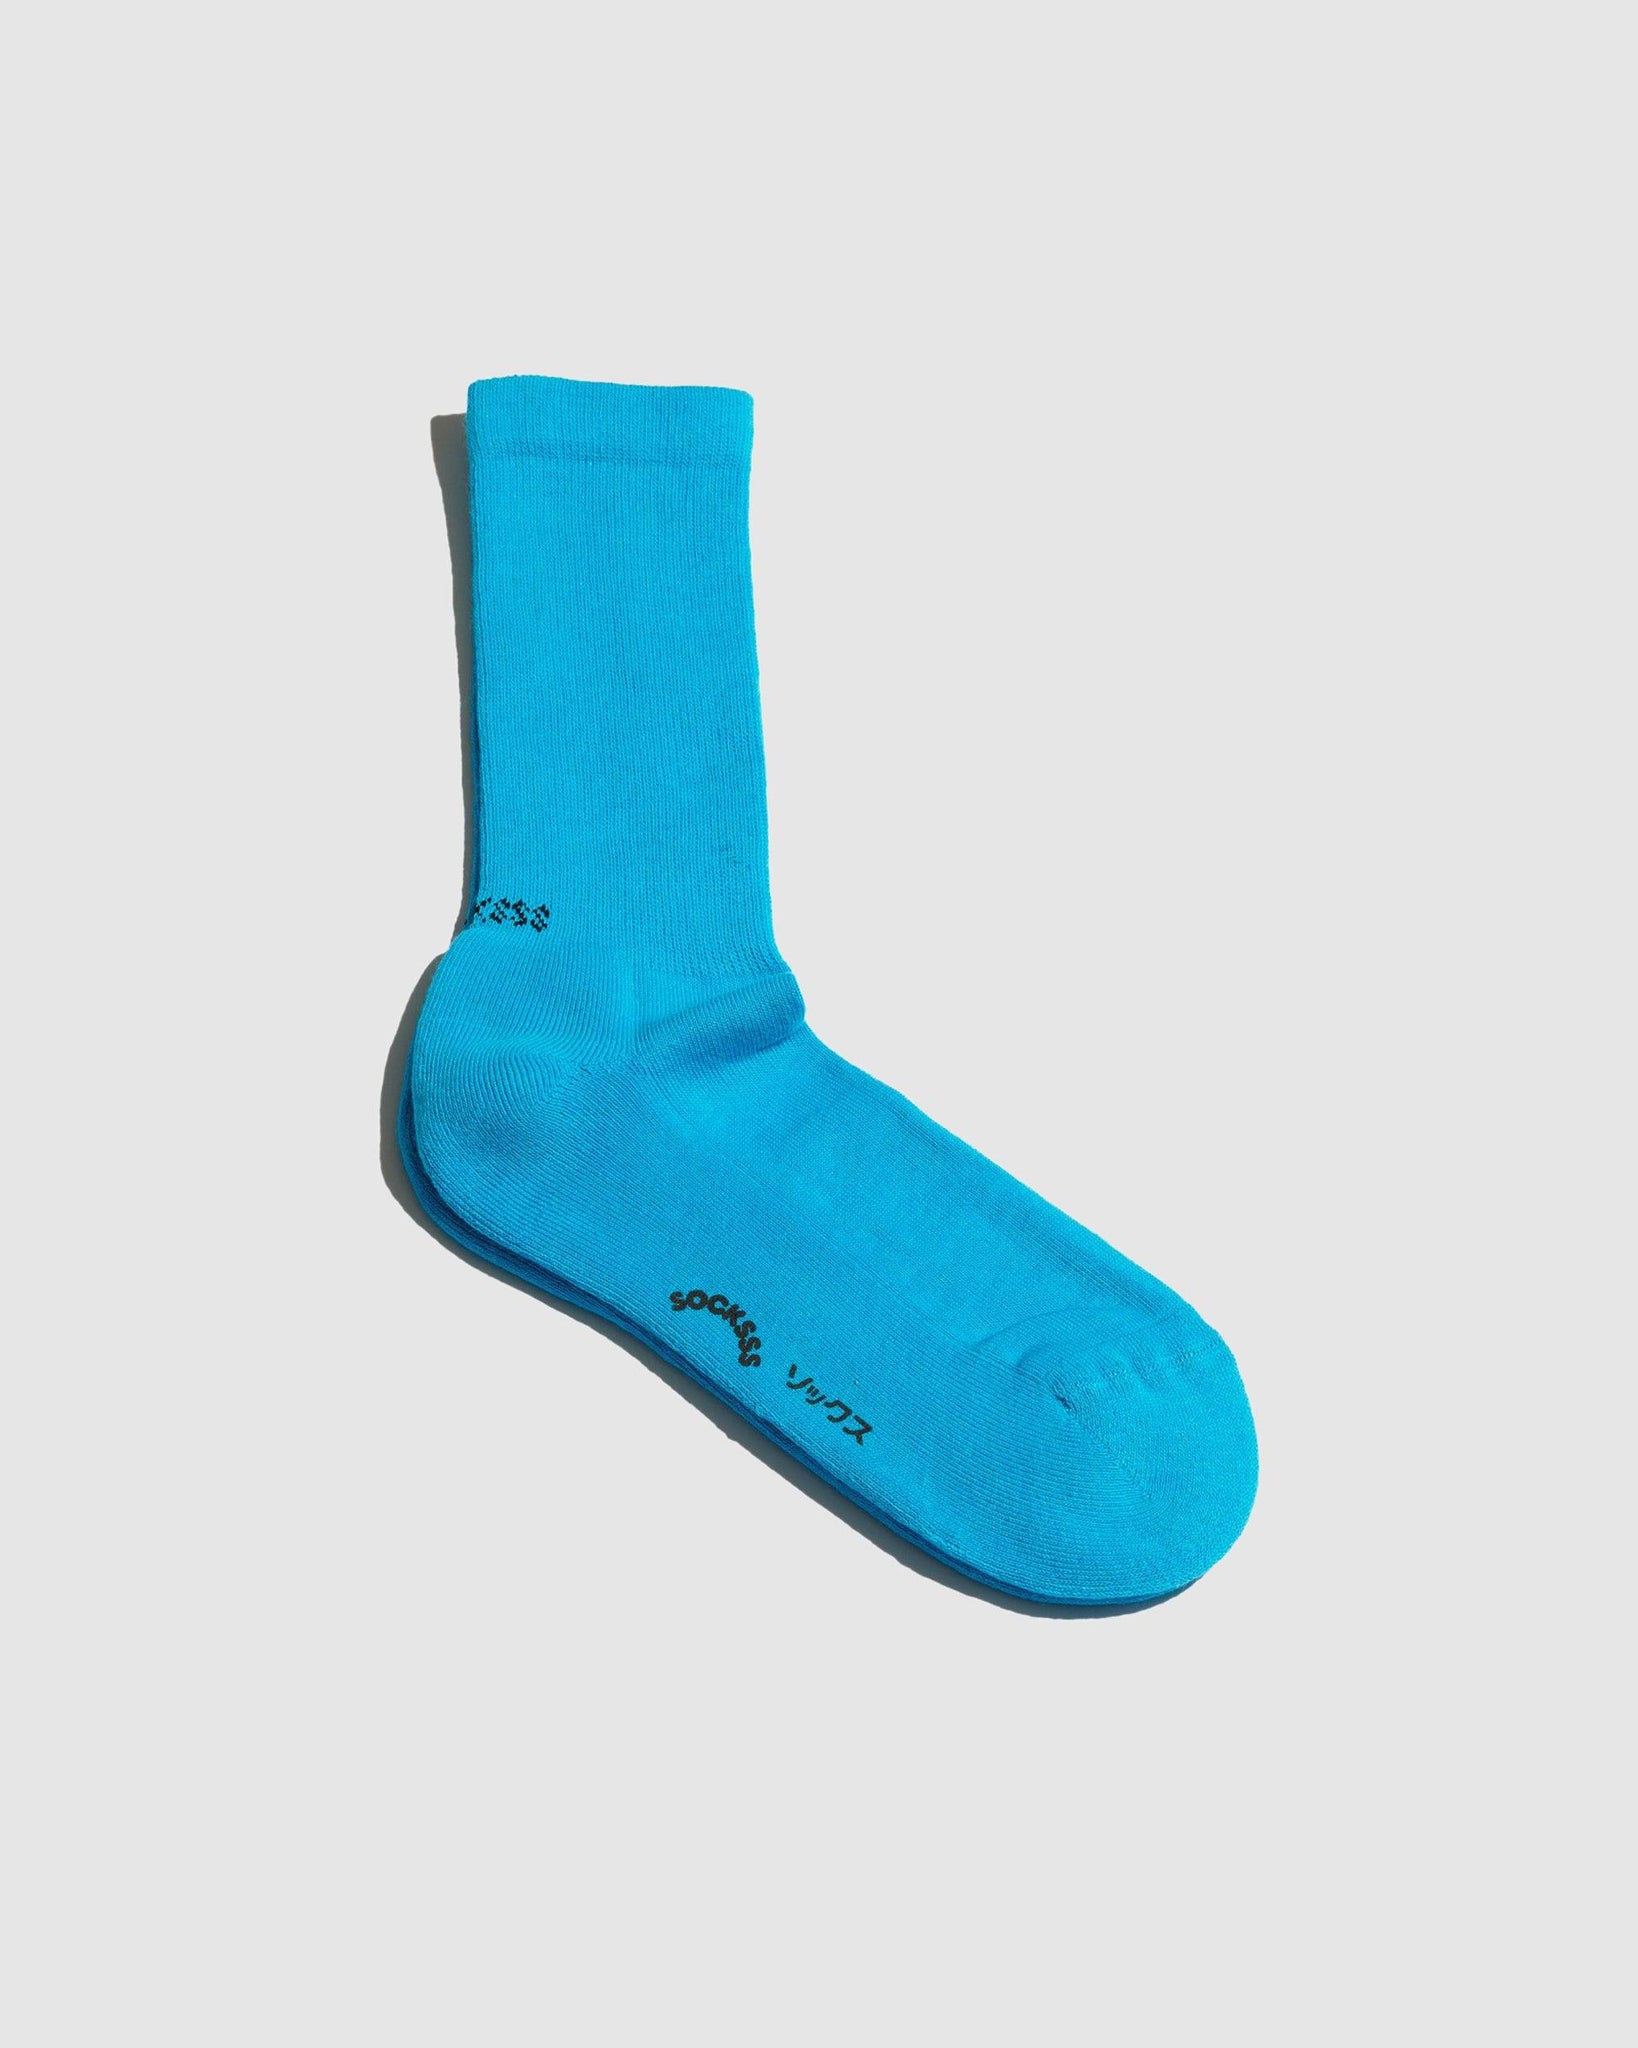 Aqua Socks - {{ collection.title }} - Chinatown Country Club 